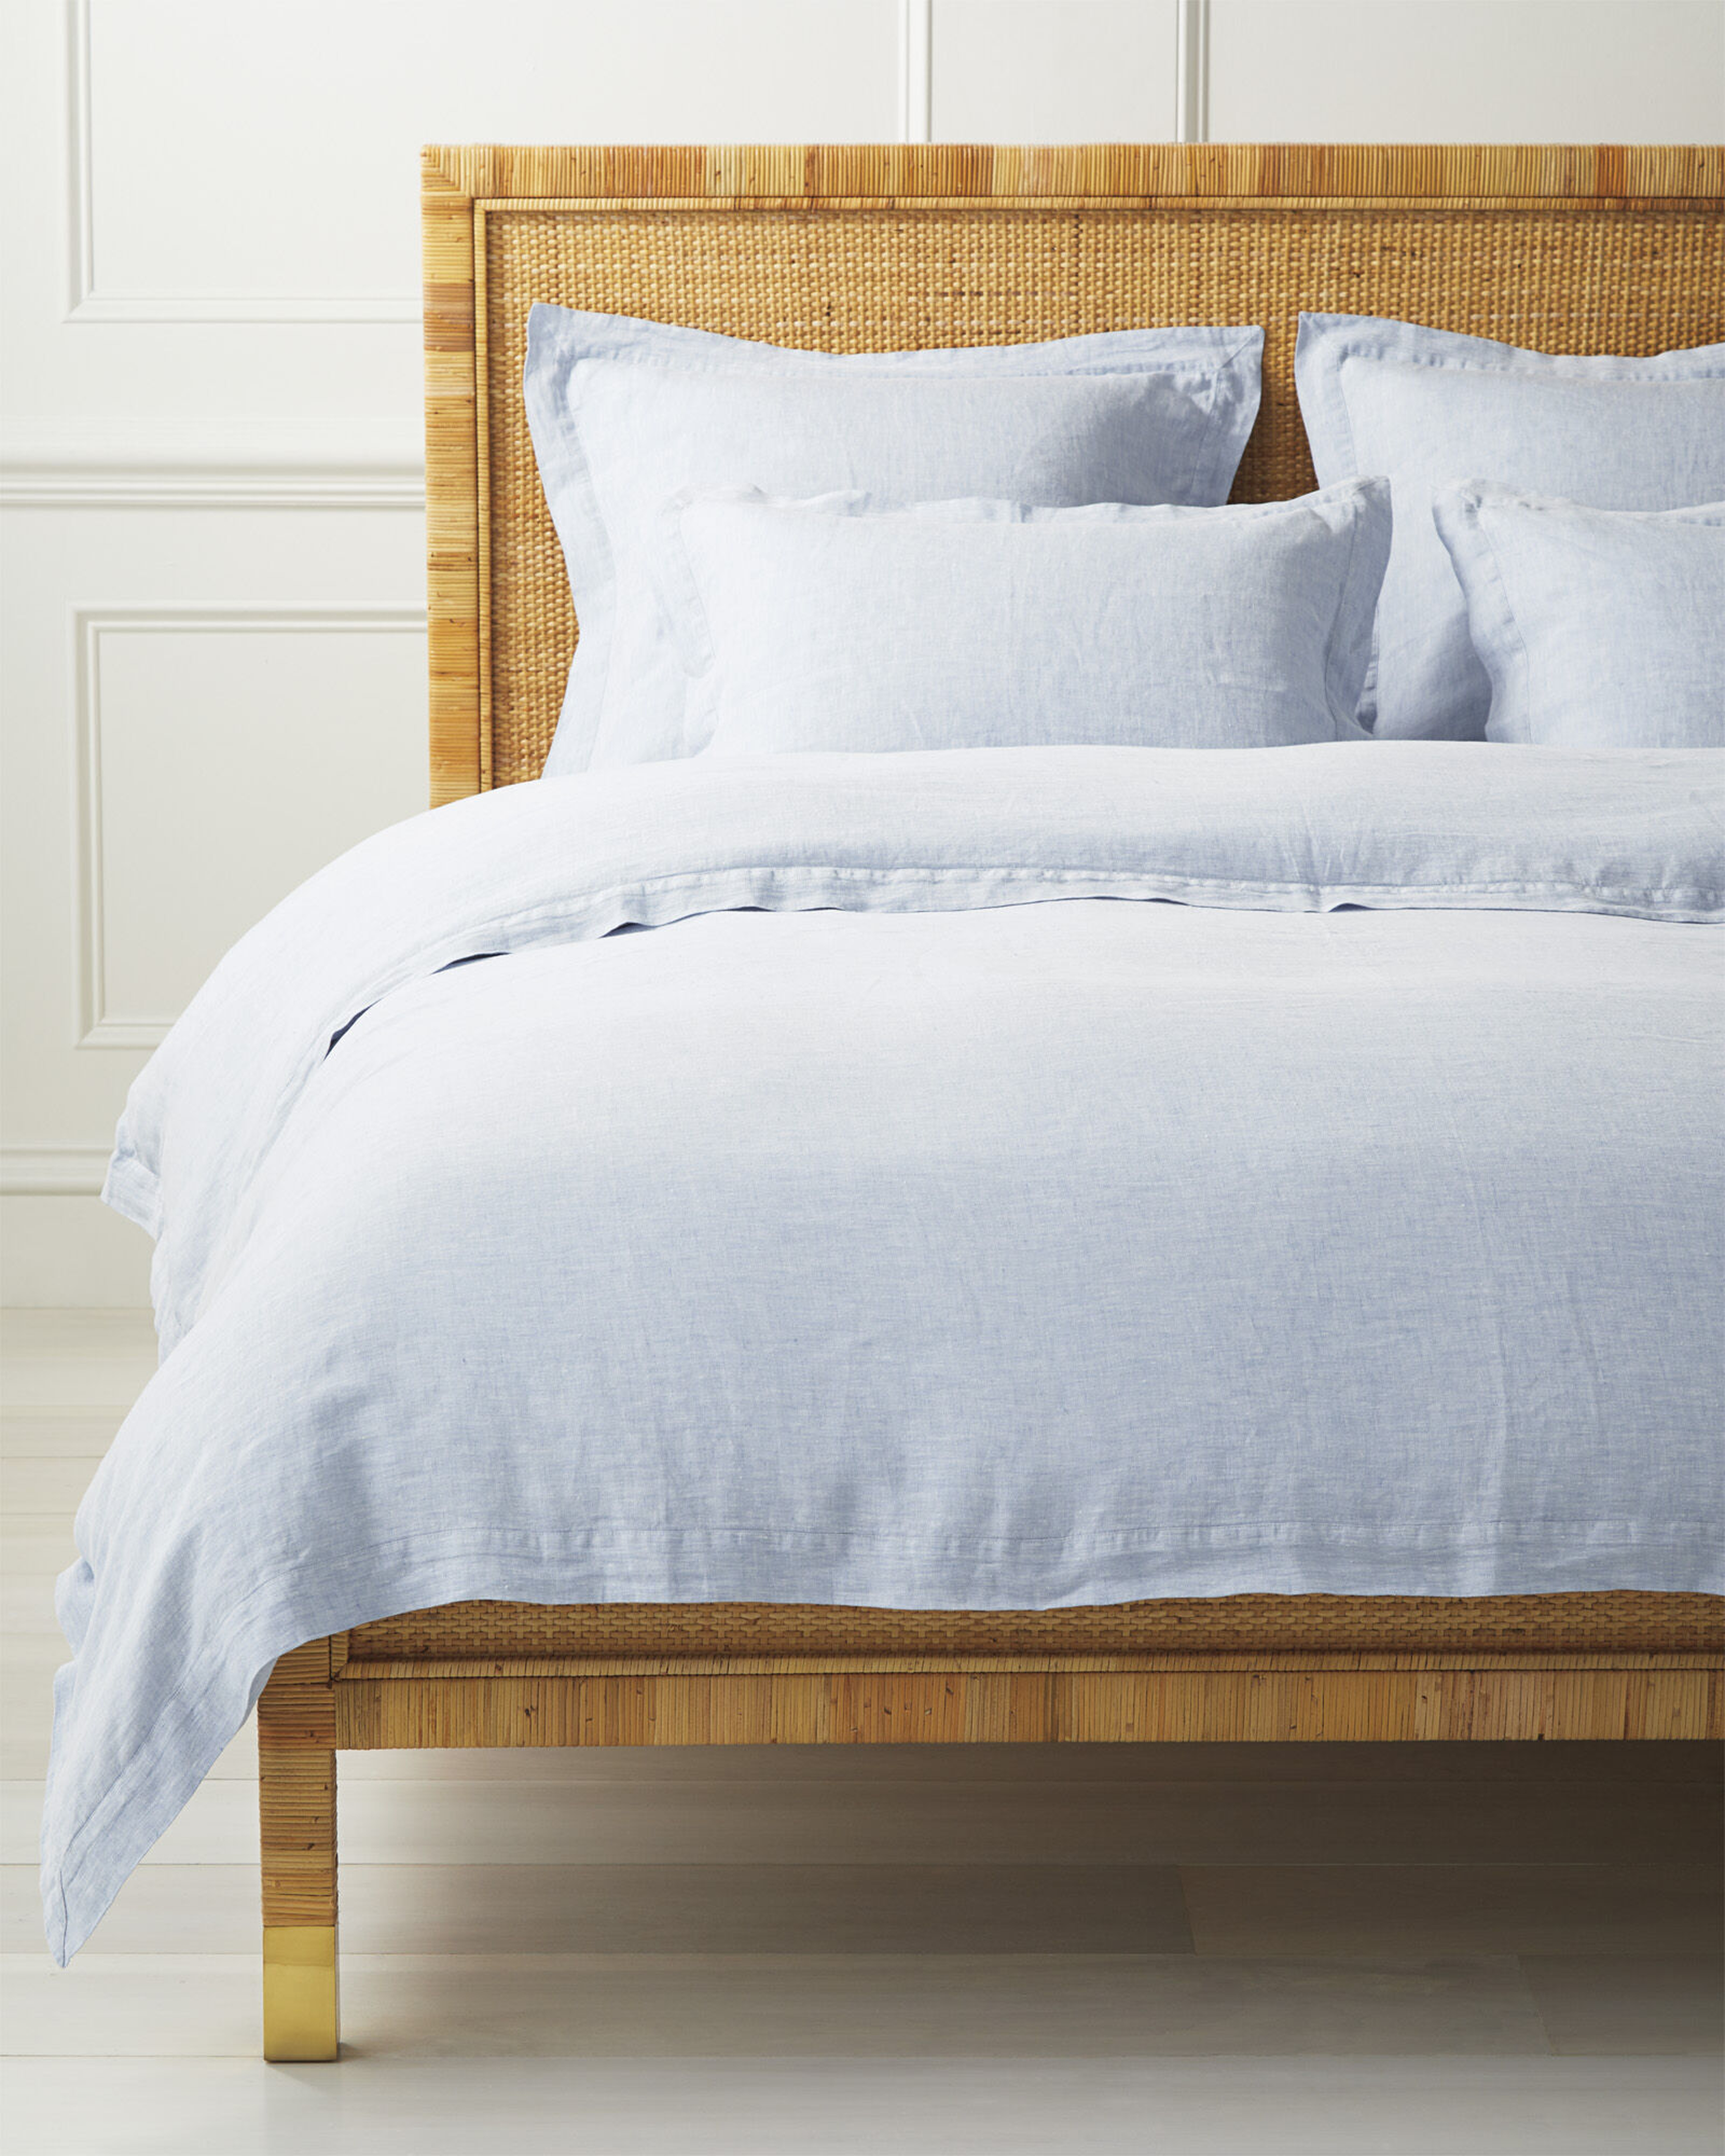 Cavallo Linen Duvet Cover, Blue Chambray, King/Cali. King - Serena and Lily